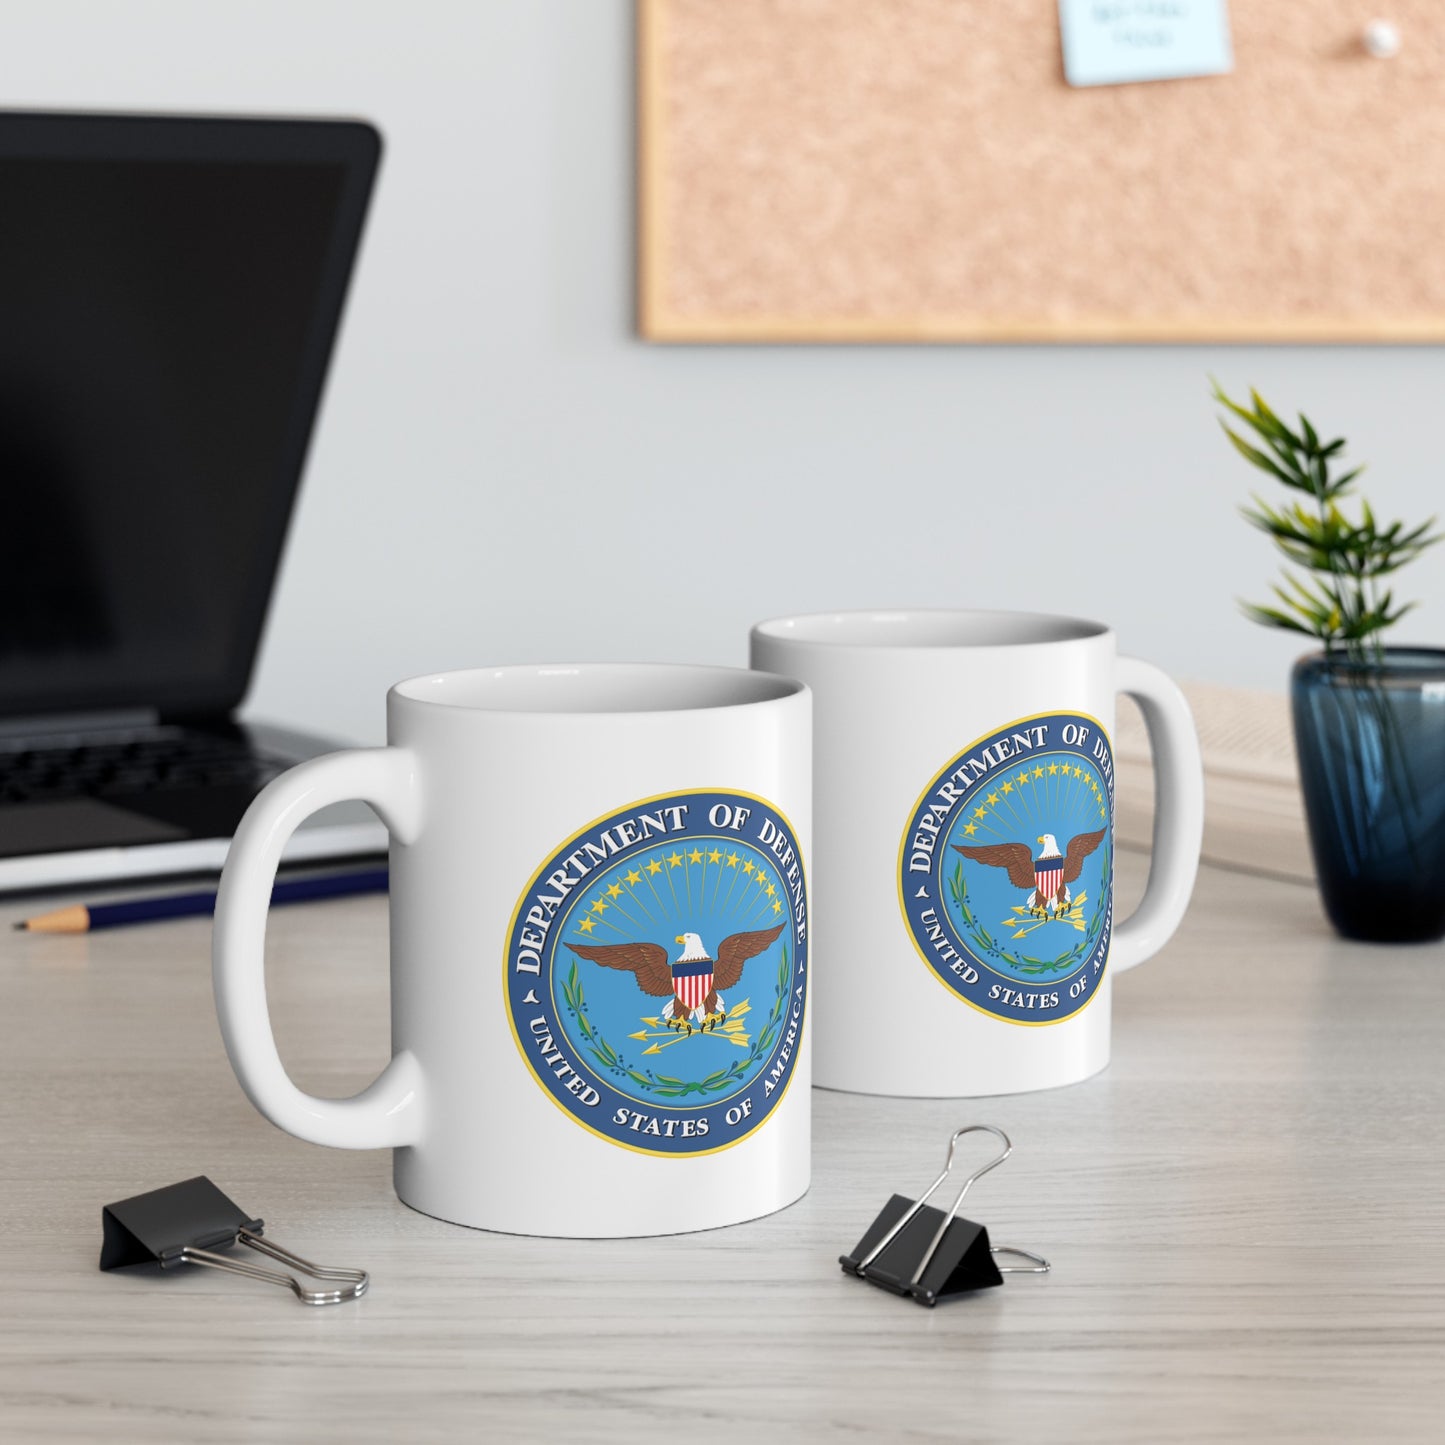 Department of Defense Coffee Mug - Double Sided White Ceramic 11oz by TheGlassyLass